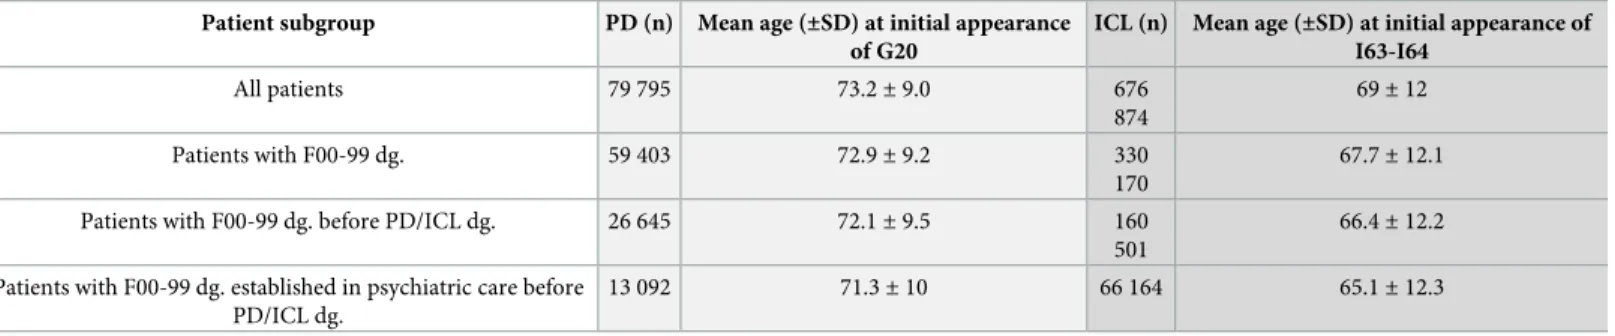 Table 1. Age of the patient subgroups.